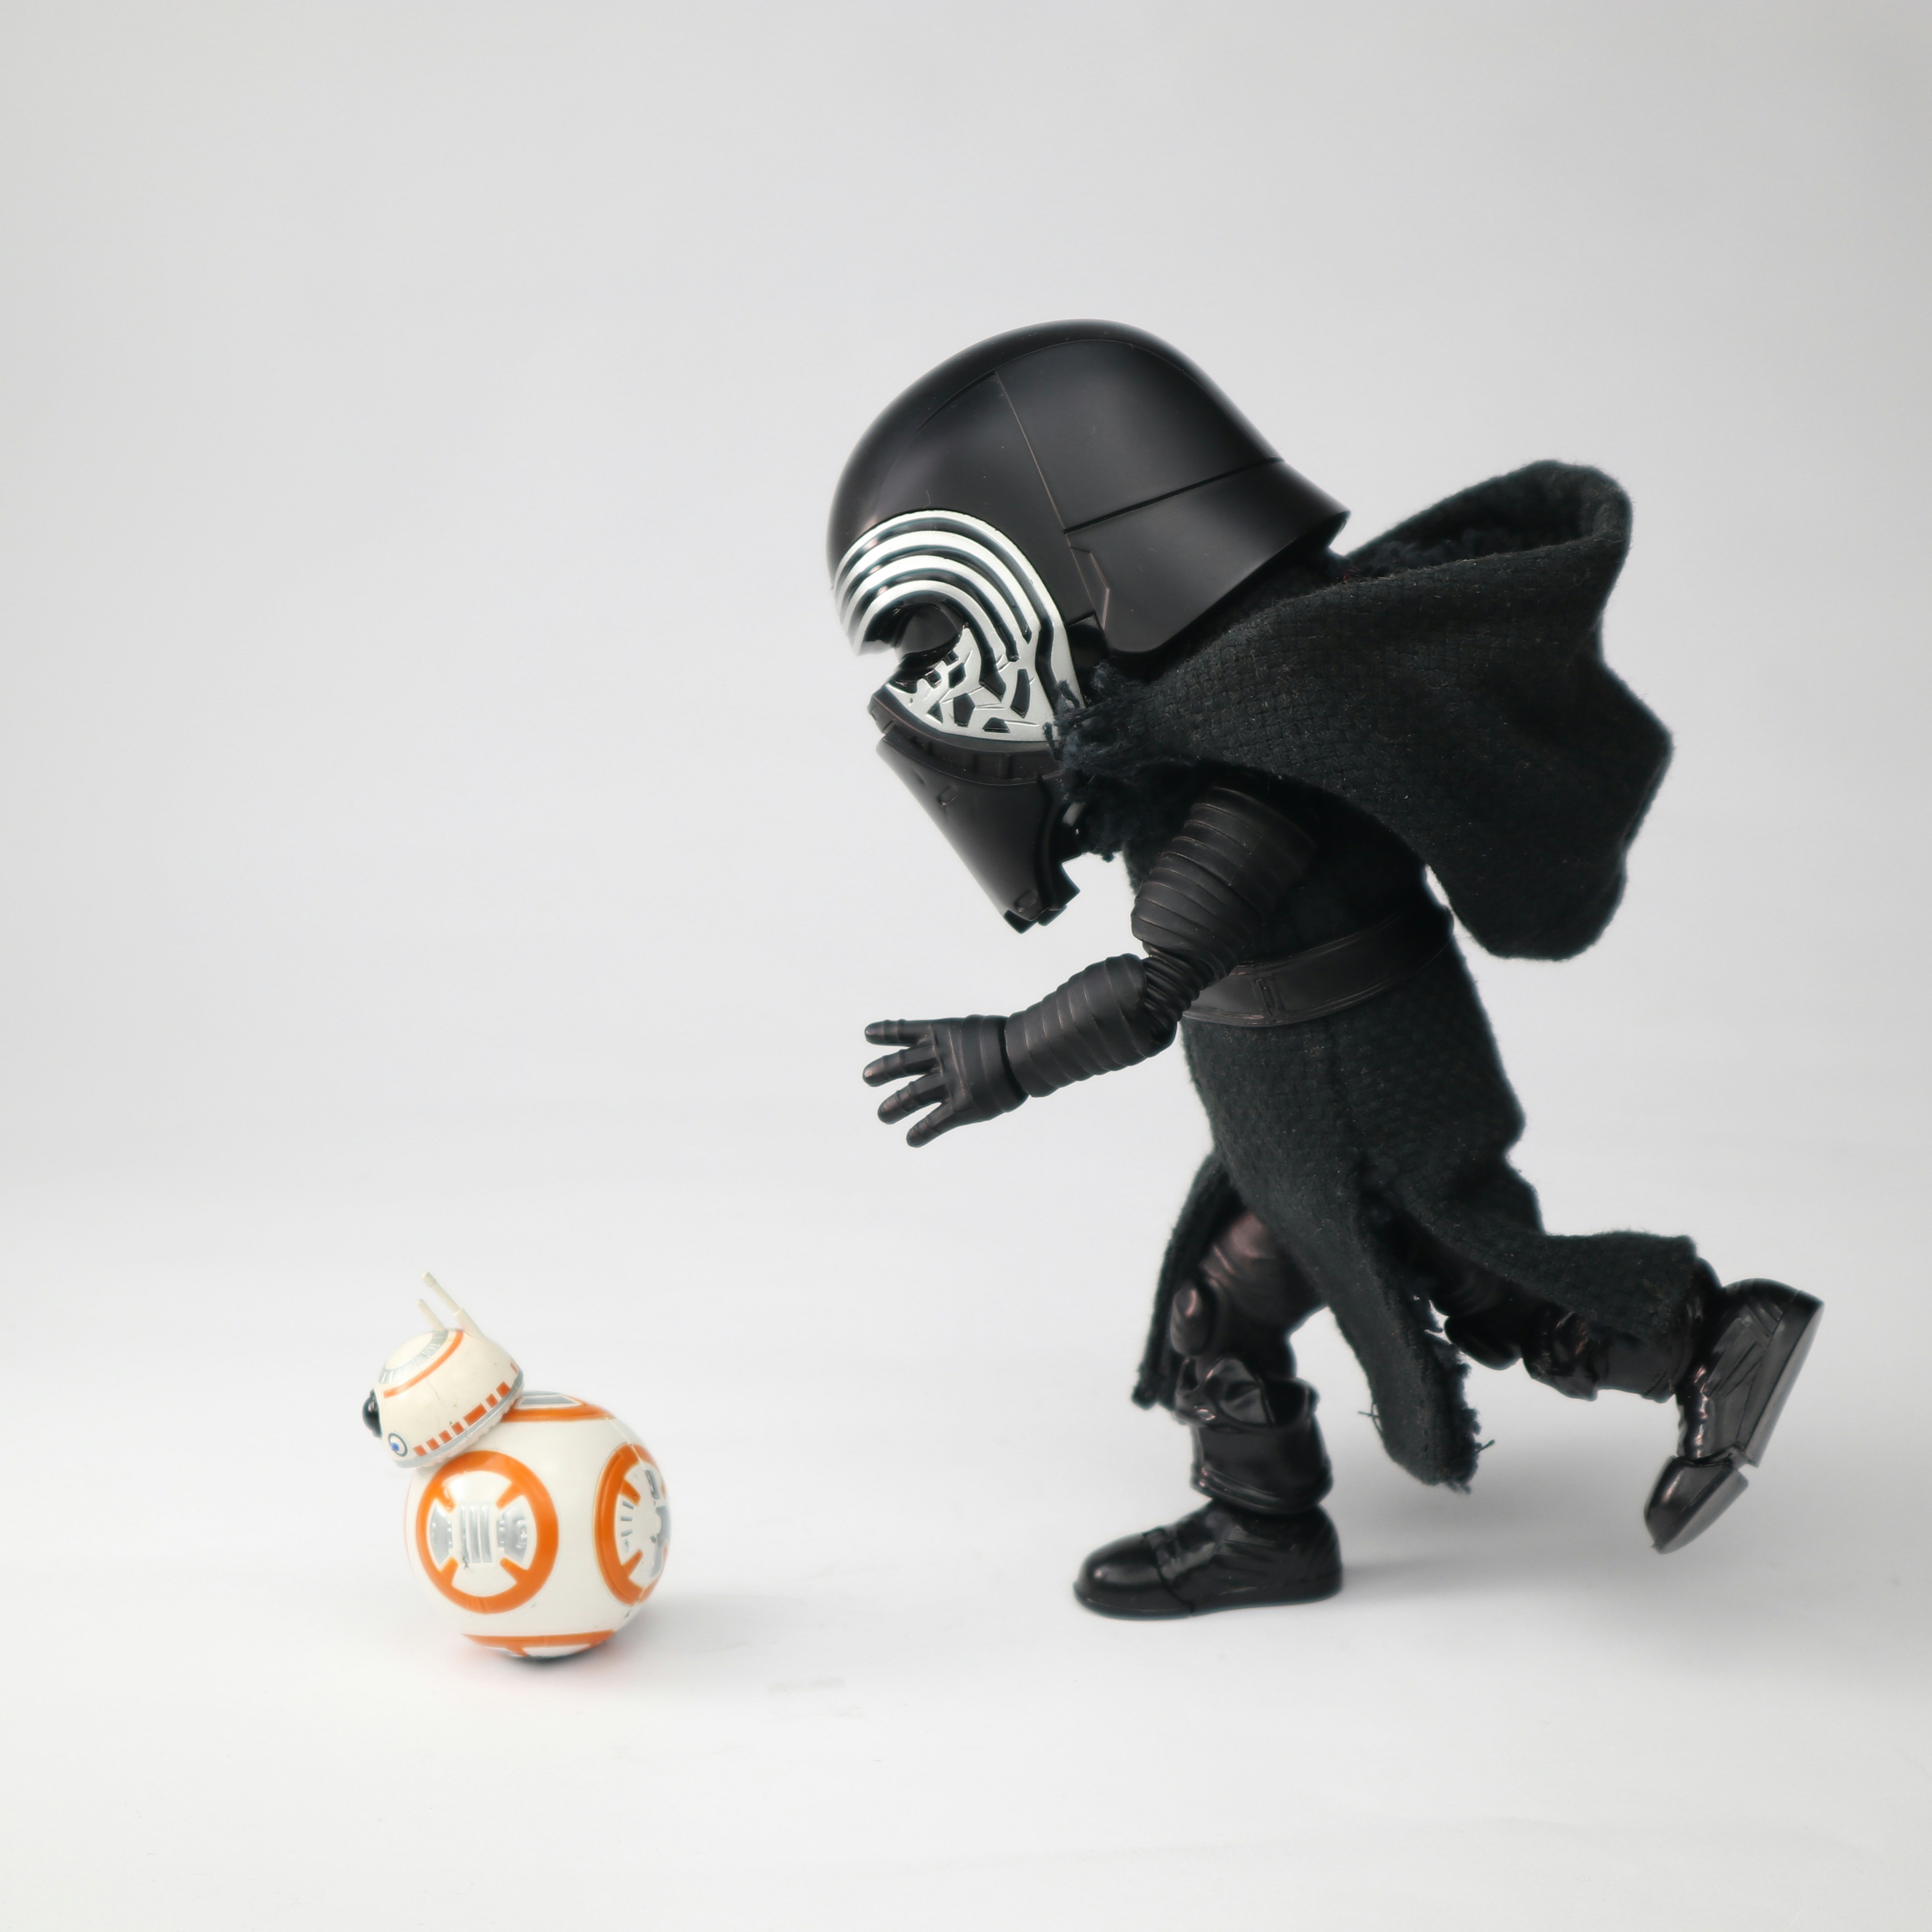 Egg Attack Action Star Wars Kylo Ren or Ben Solo with BB-8 by Beast Kingdom